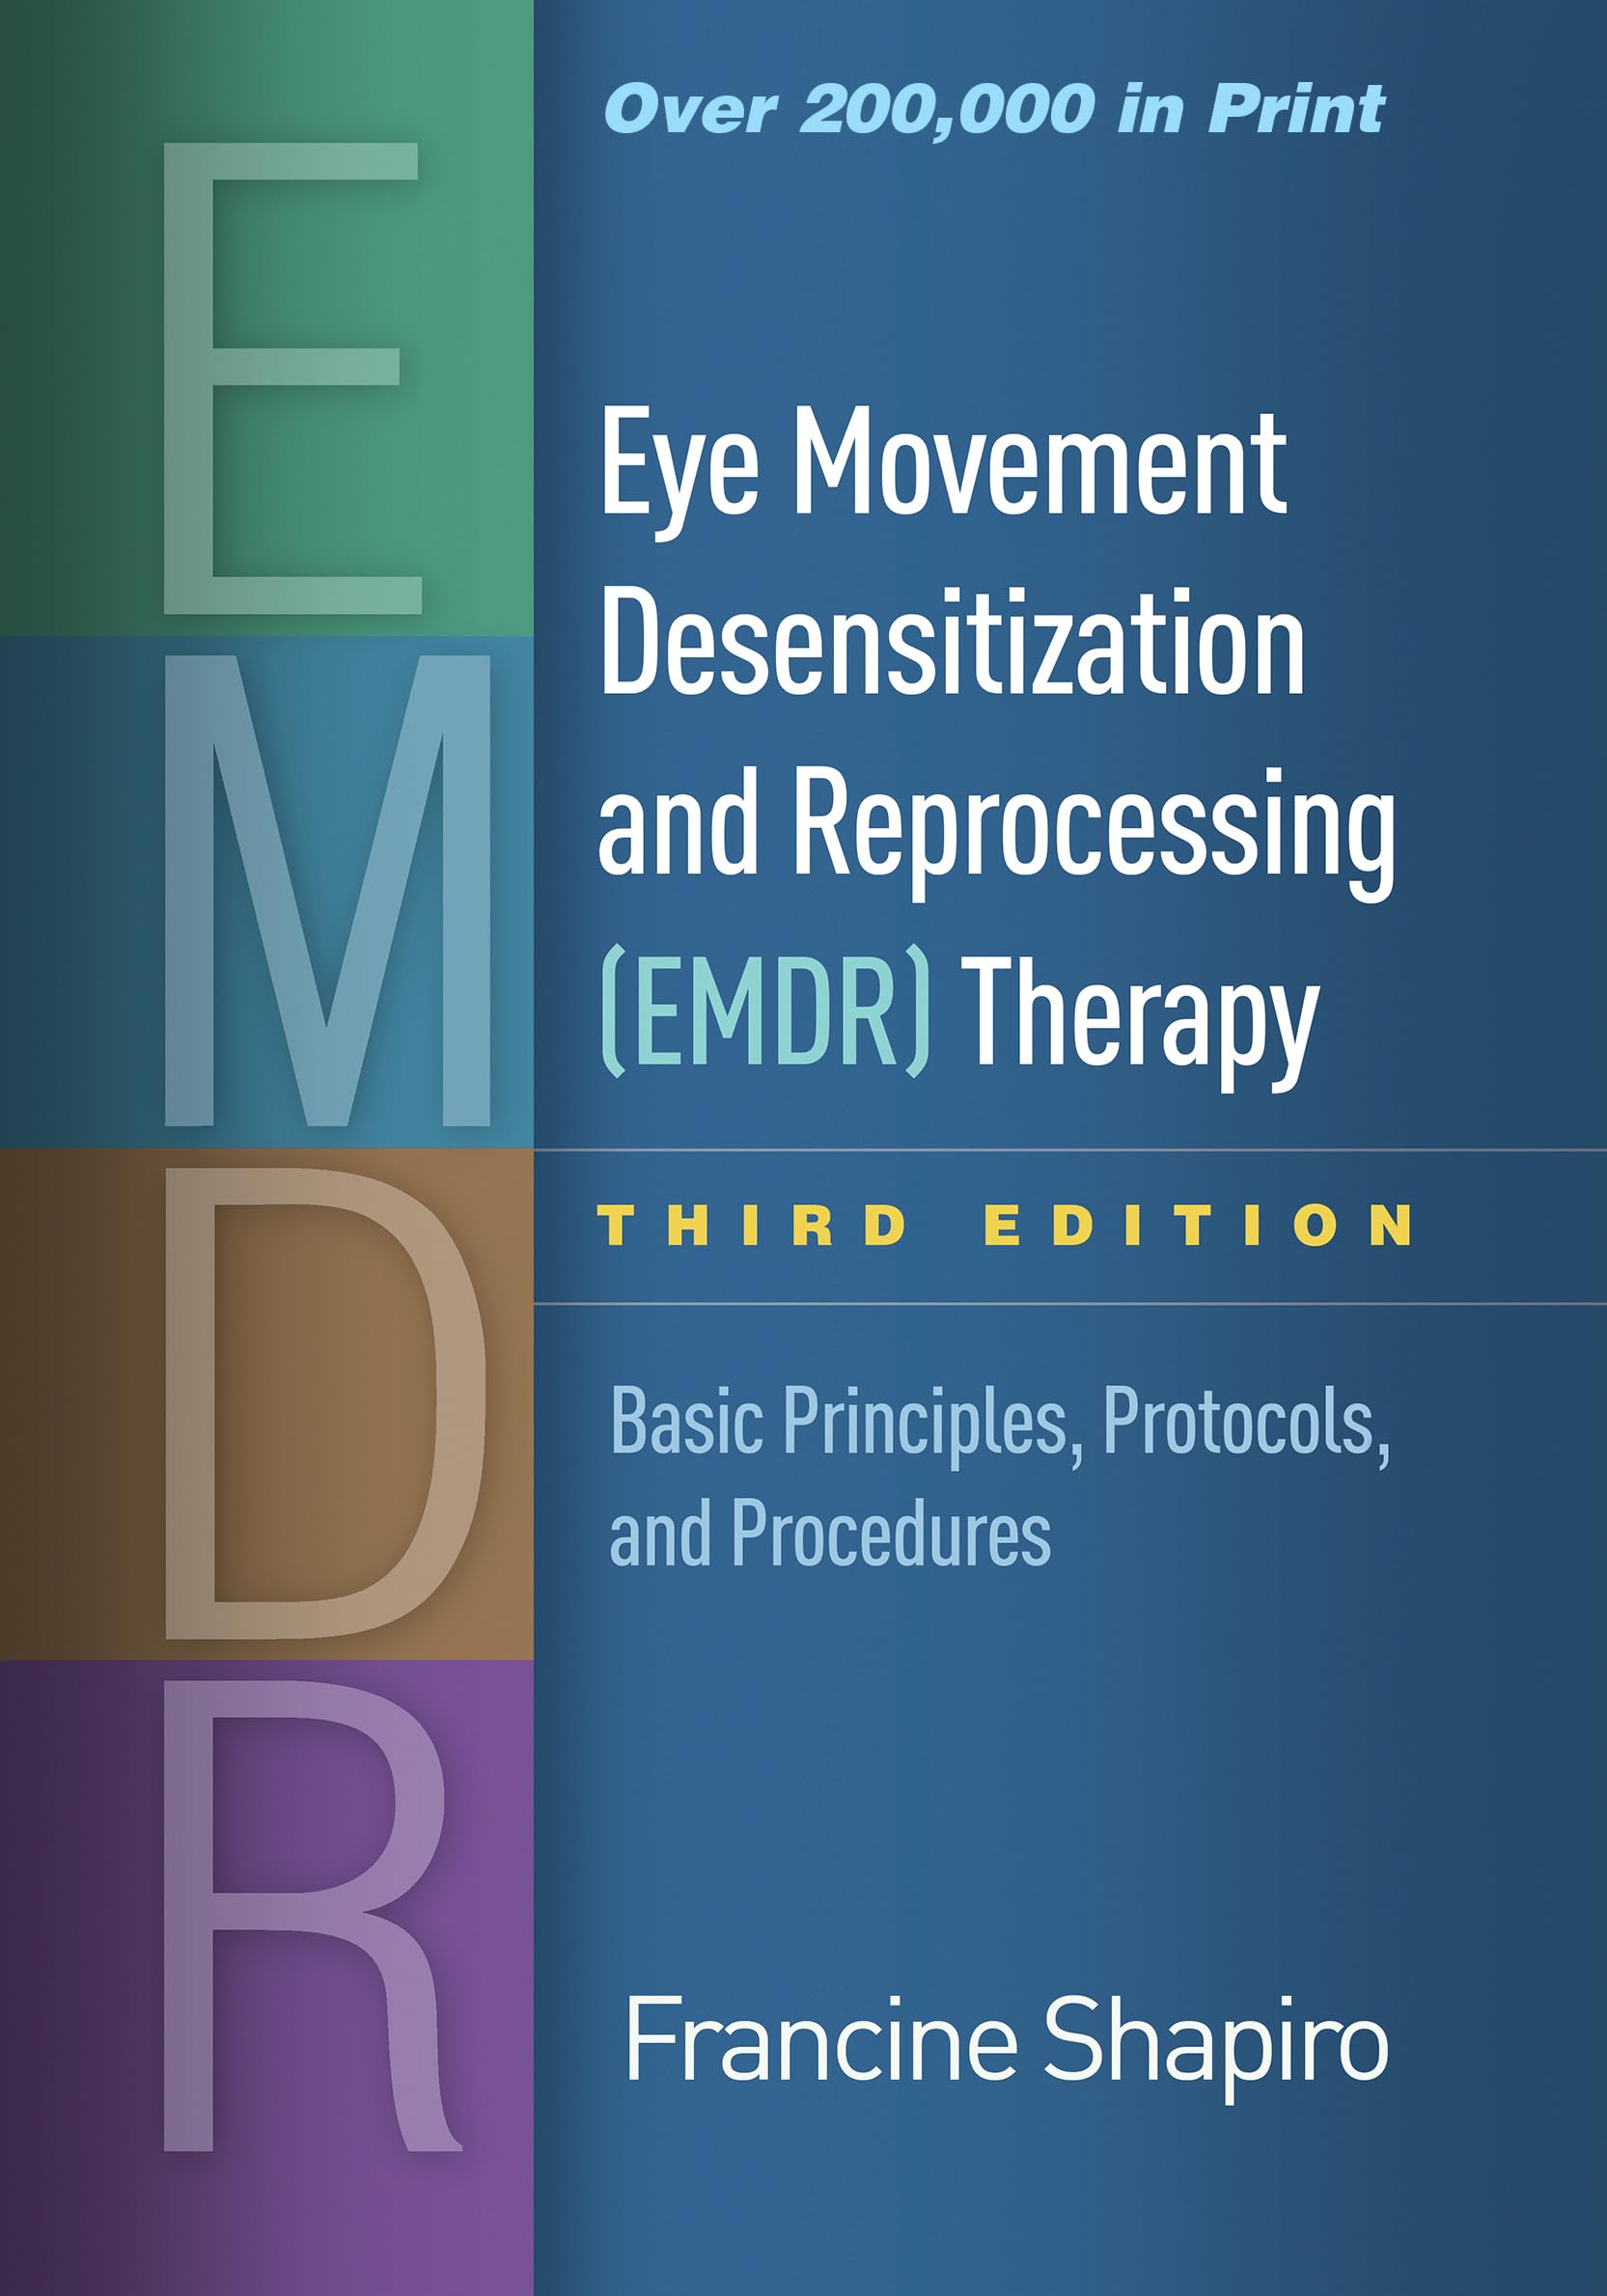 Eye Movement Desensitization and Reprocessing (Emdr) Therapy, Third Edition: Basic Principles, Protocols, and Procedures by Shapiro, Francine